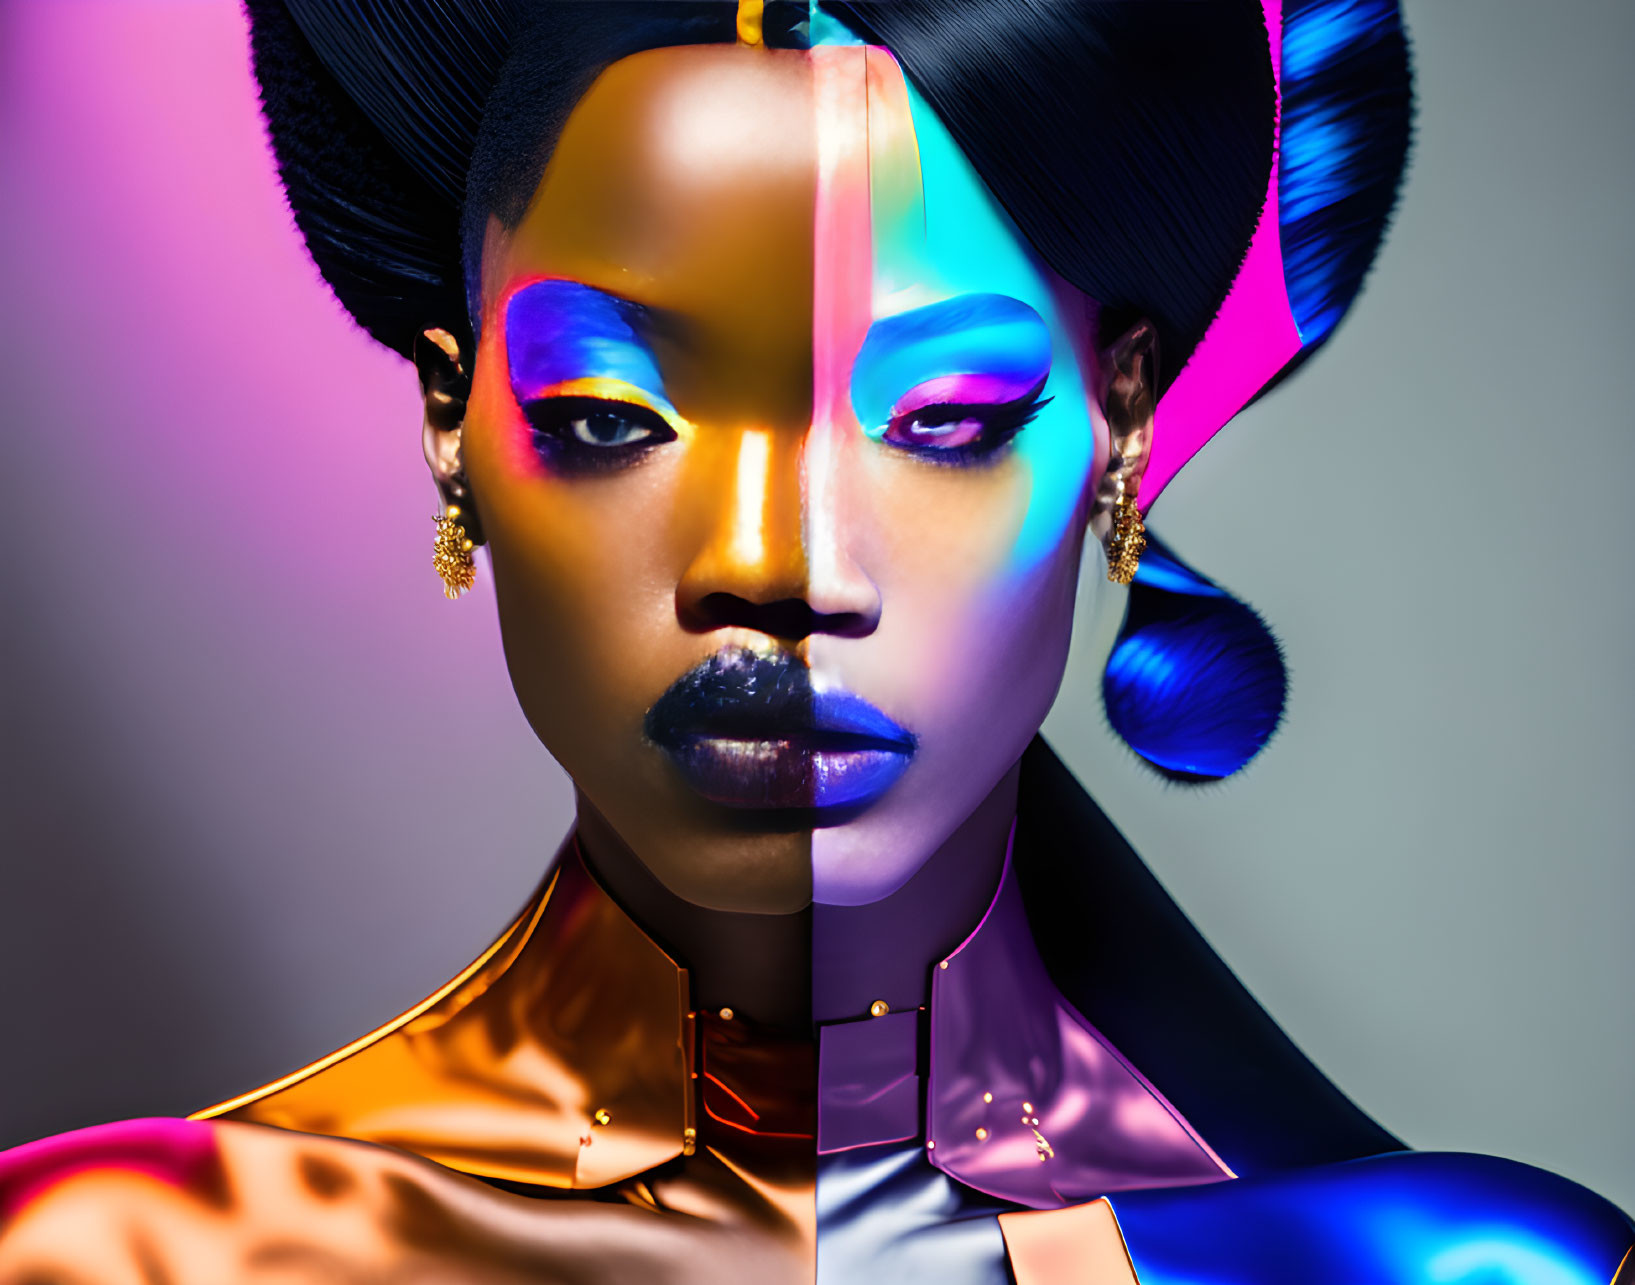 Vibrant abstract portrait of a woman with bold makeup and metallic attire on gradient backdrop